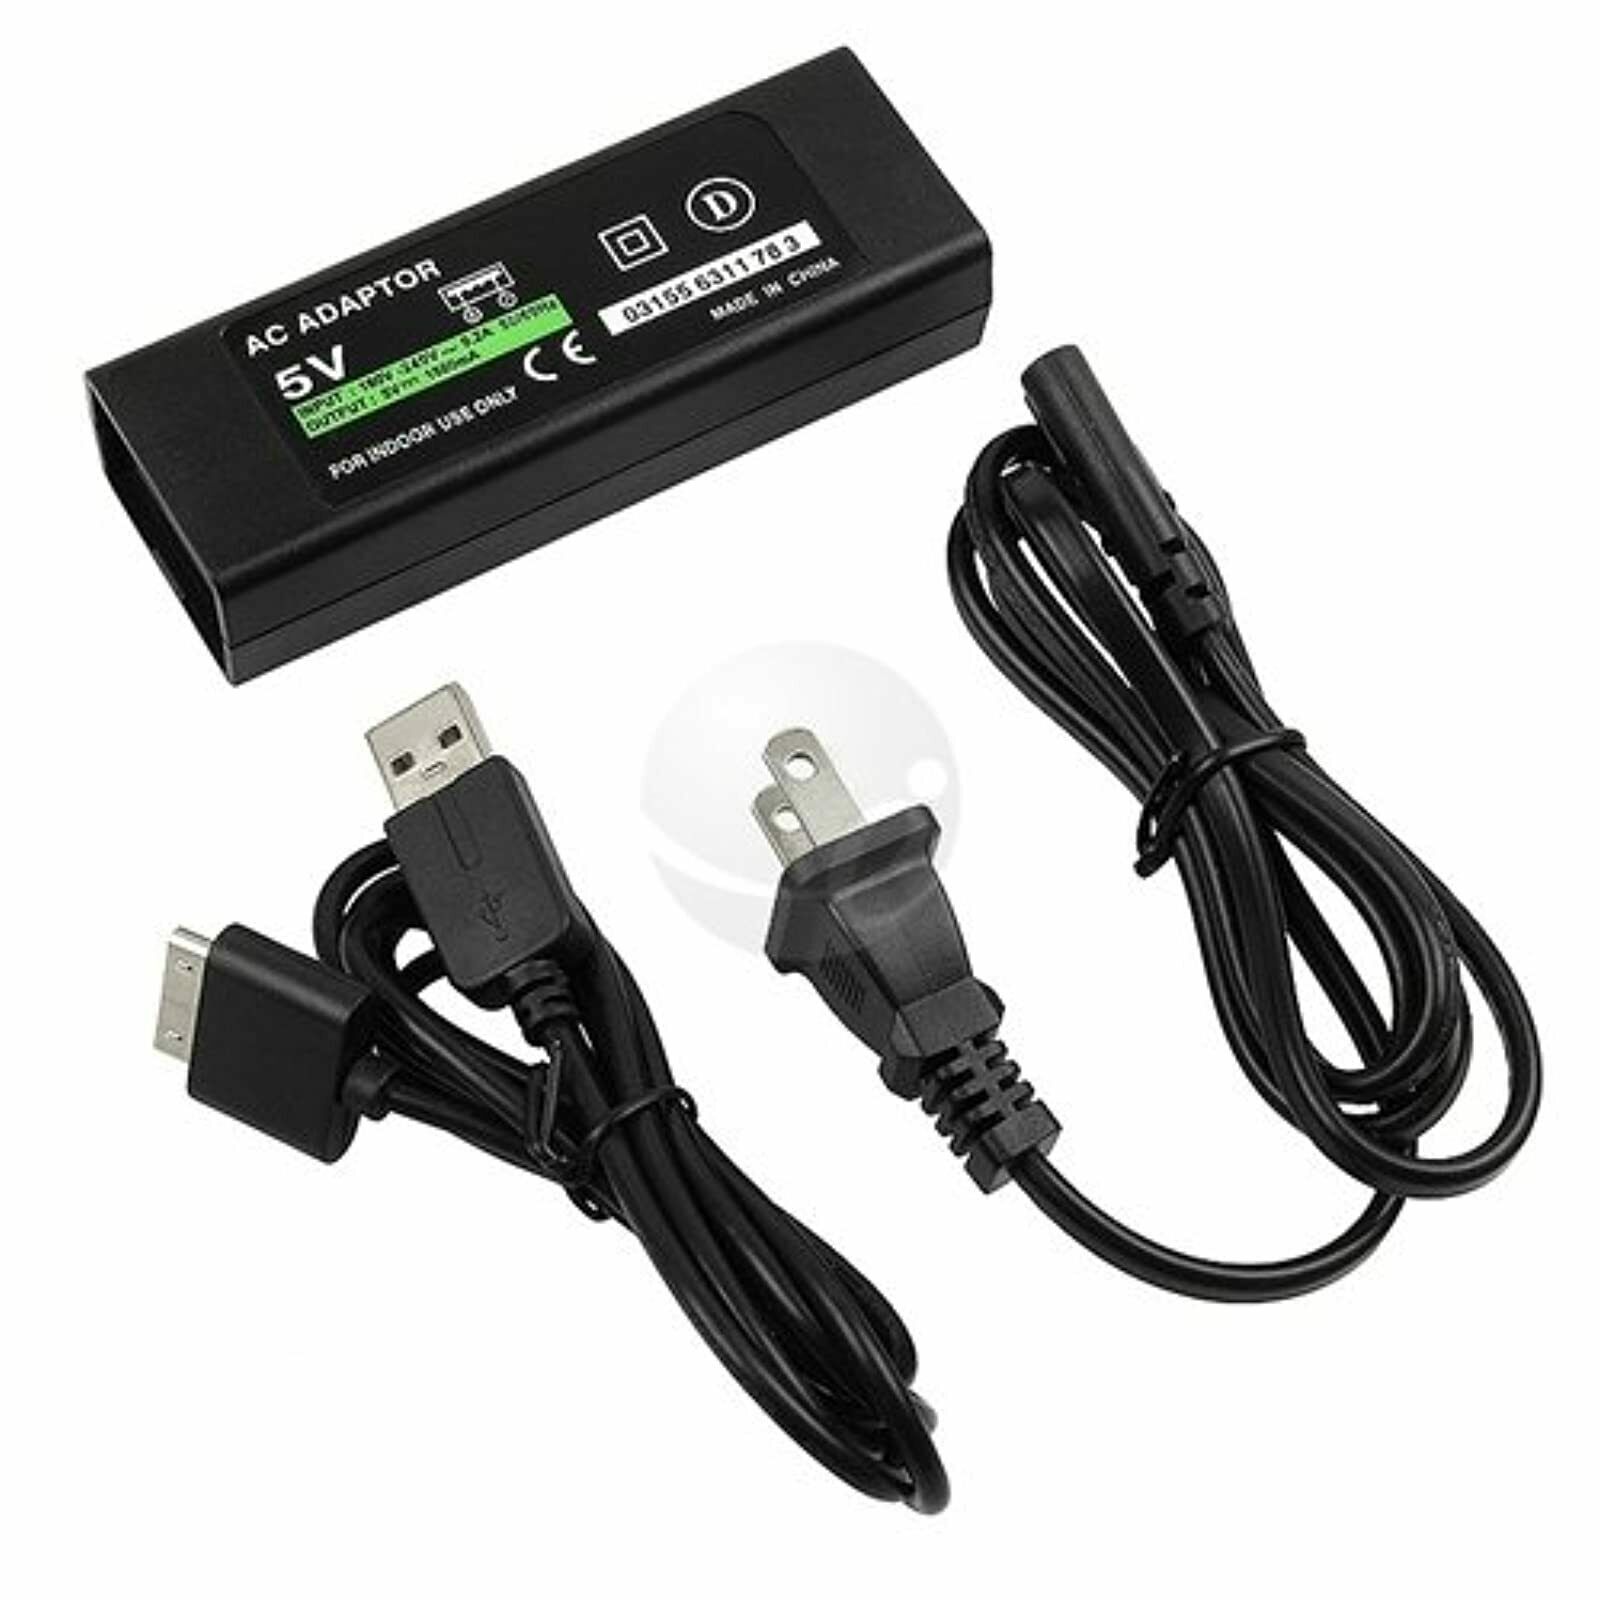 AC Adapter Power Wall Home Charger Cable For PSP Go UMD Go MPN VF-76-PSP-0011-US-02 Type Power Adapter Platform Sony P